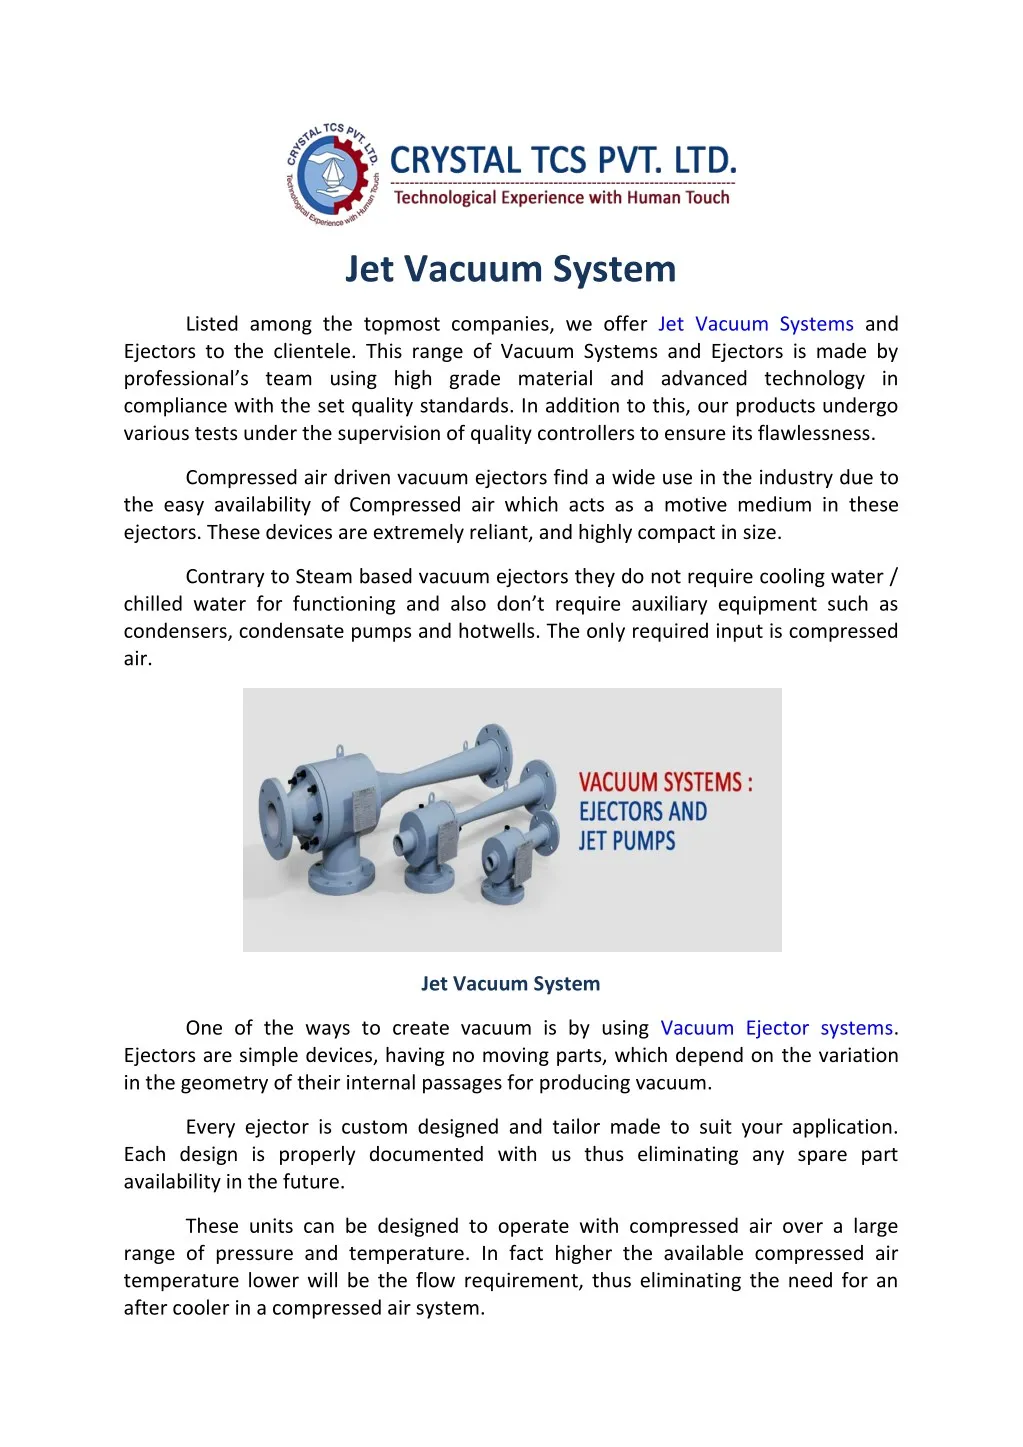 jet vacuum system listed among the topmost